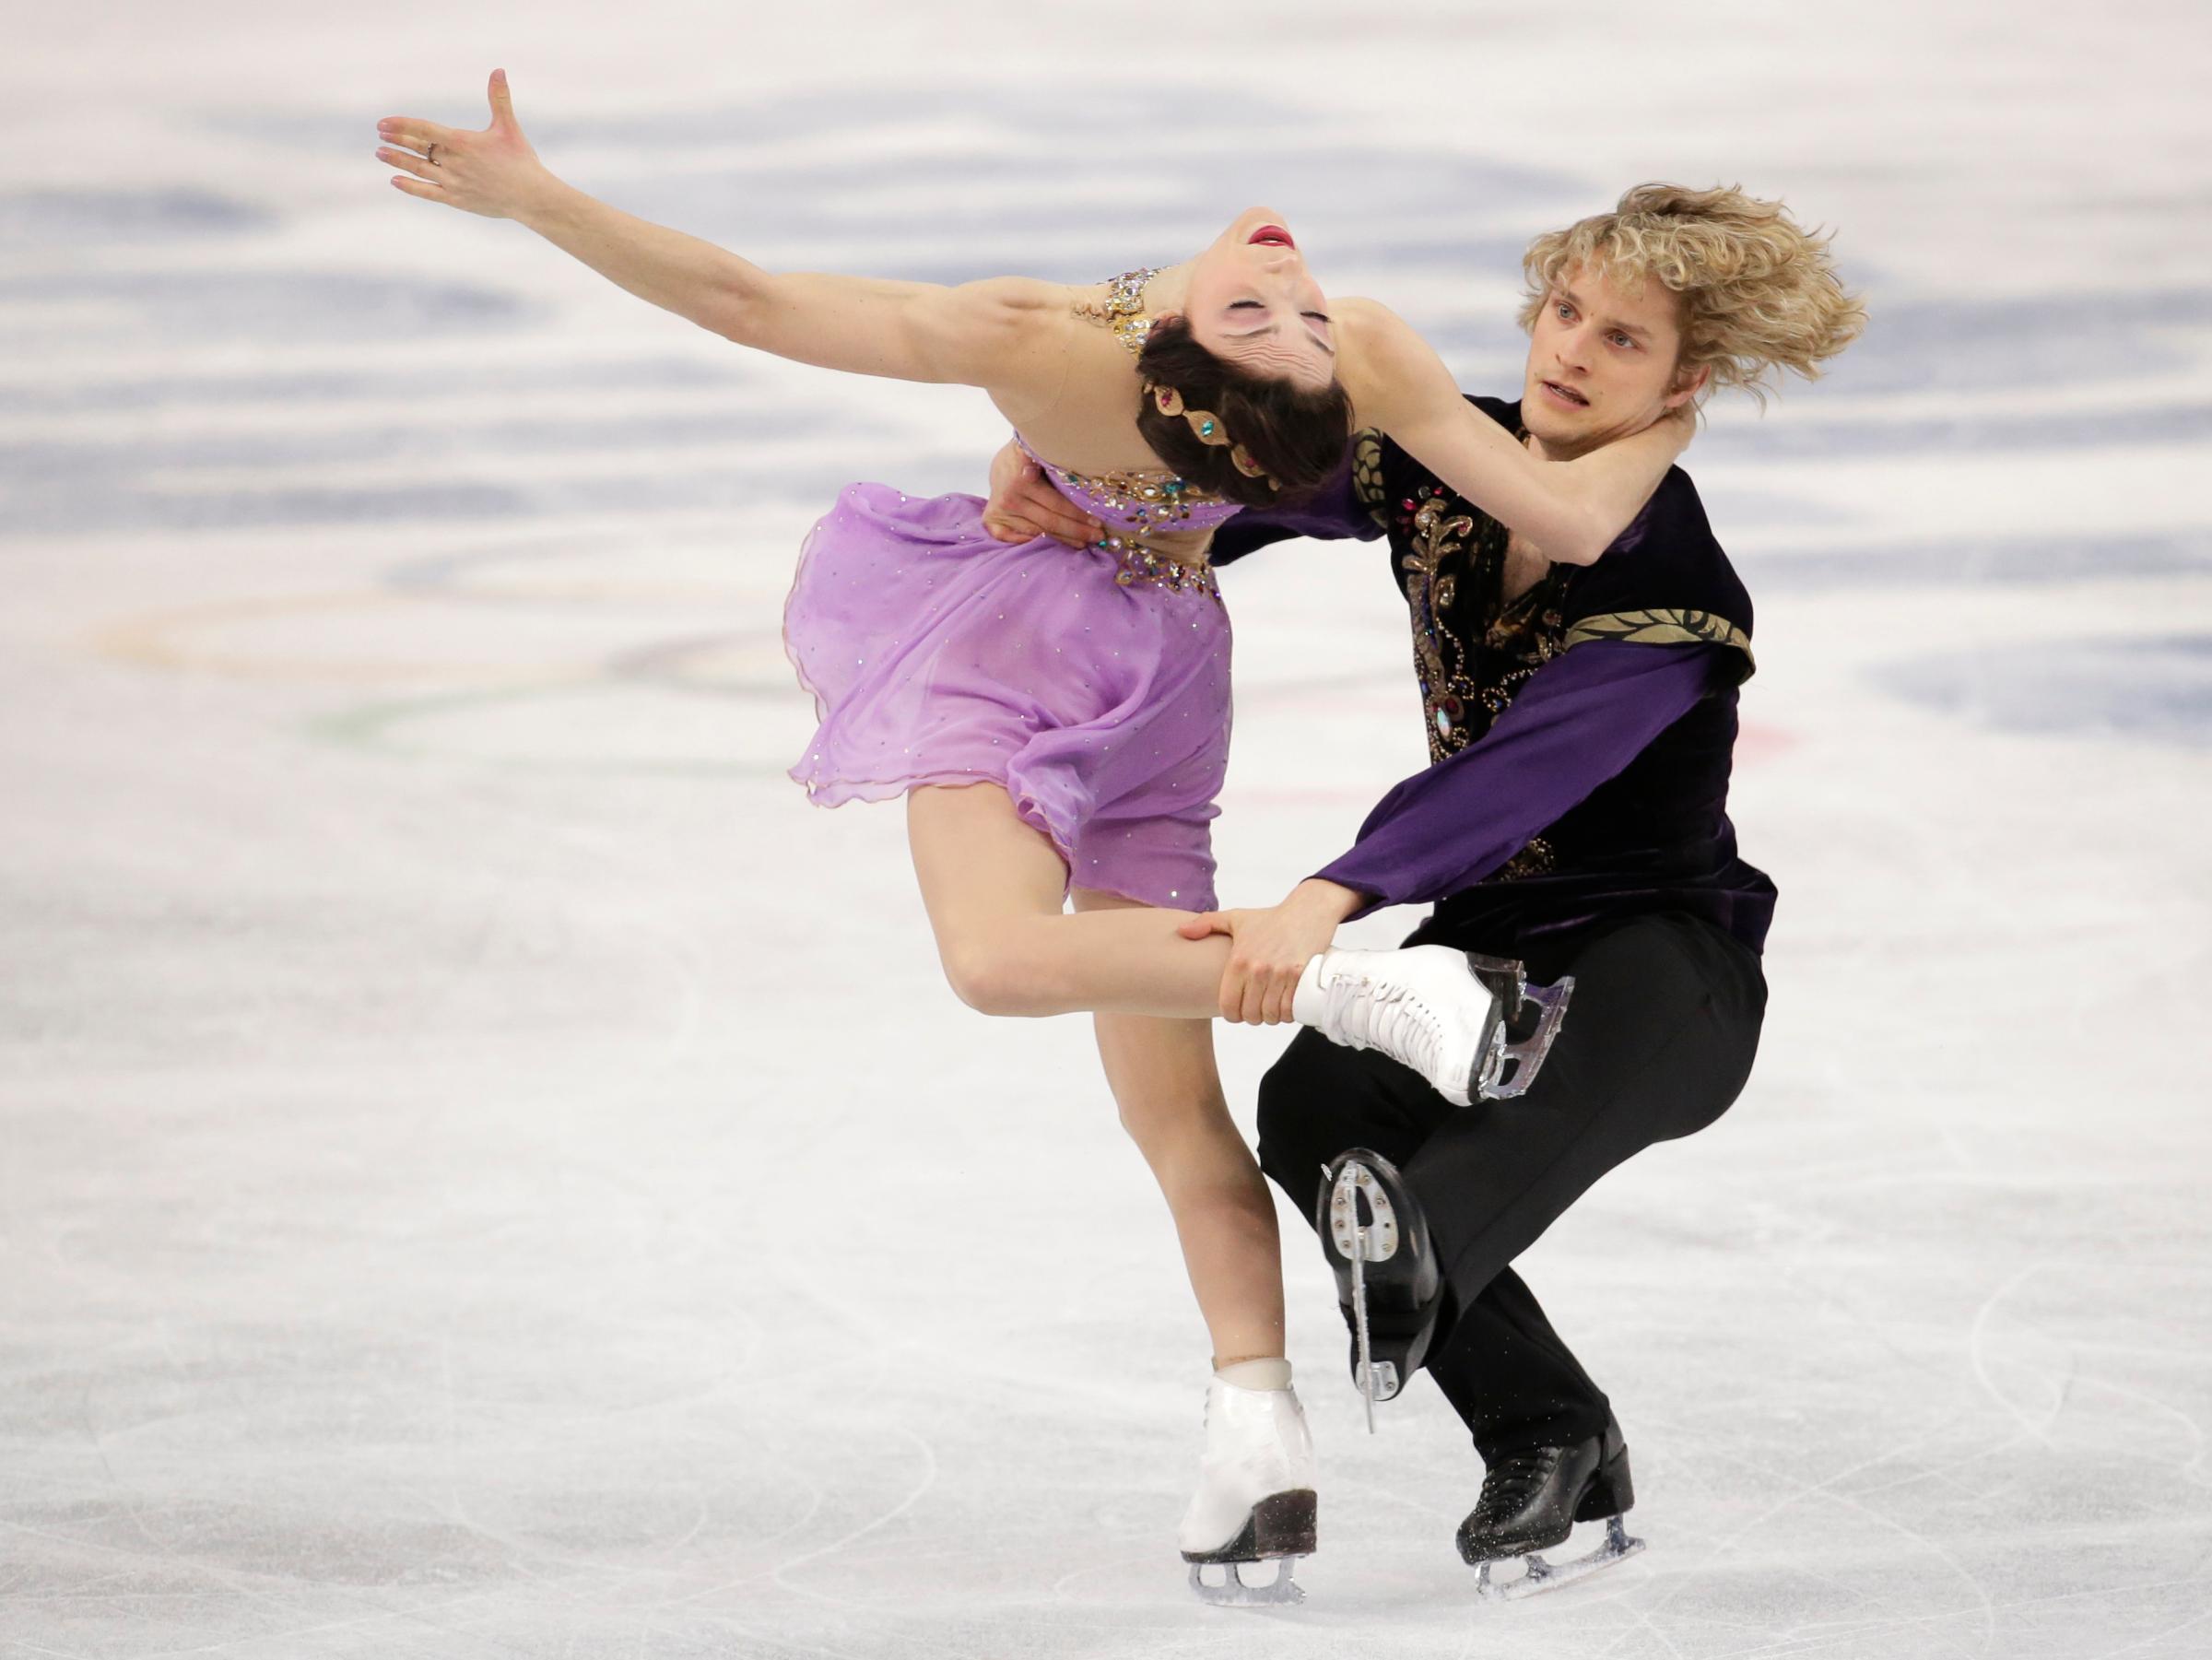 Meryl Davis and Charlie White of the United States compete in the ice dance free dance figure skating finals at the Iceberg Skating Palace.